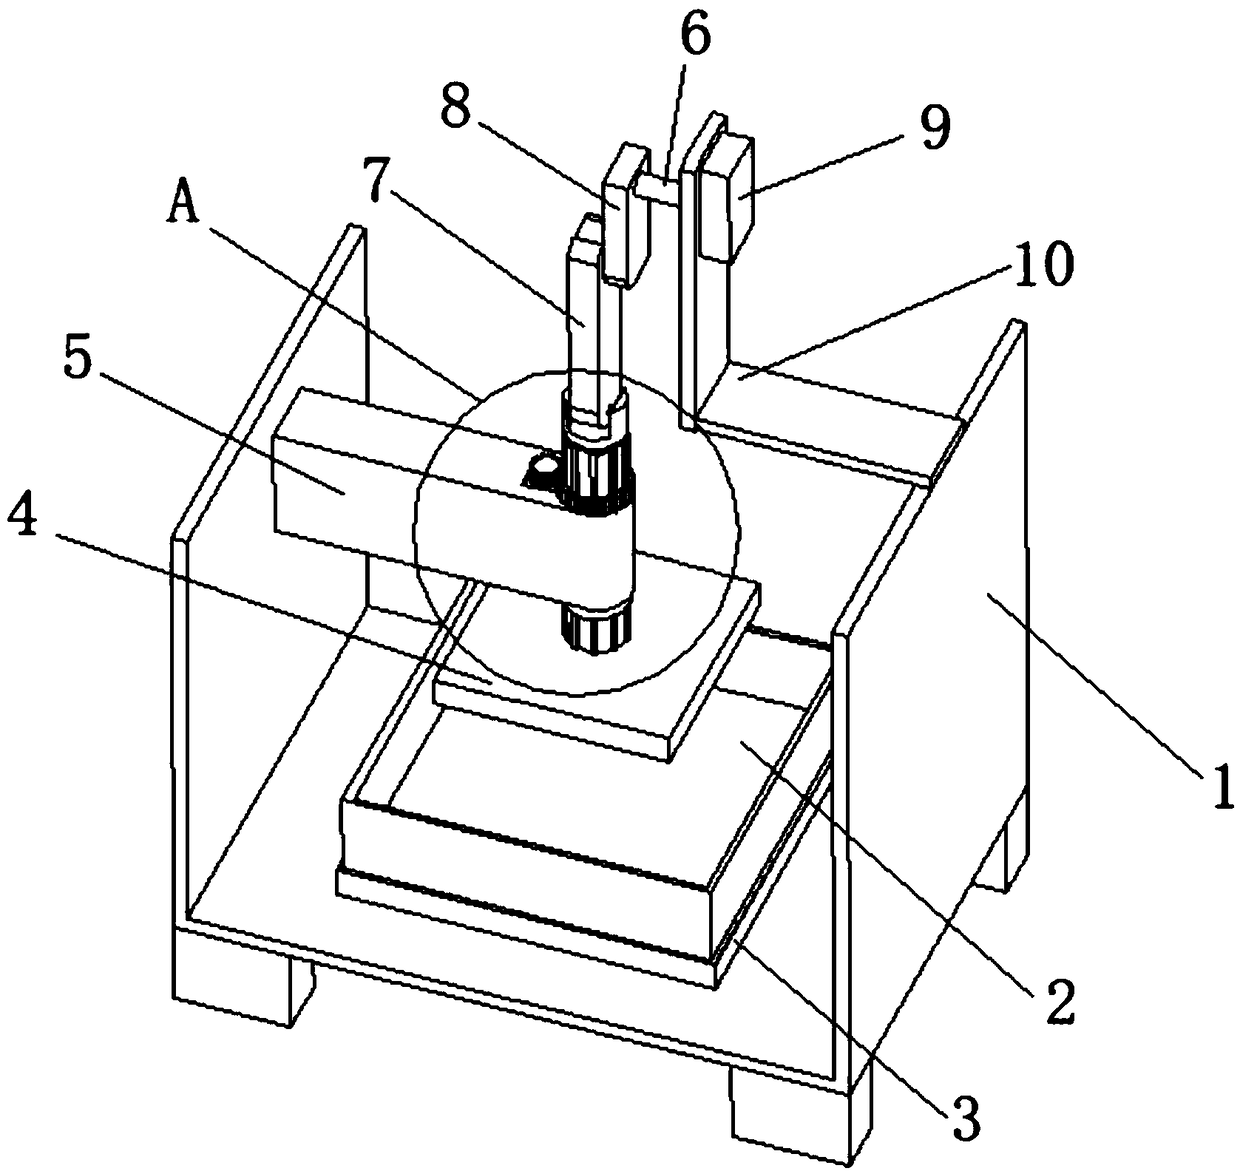 Hammering apparatus used for meat products